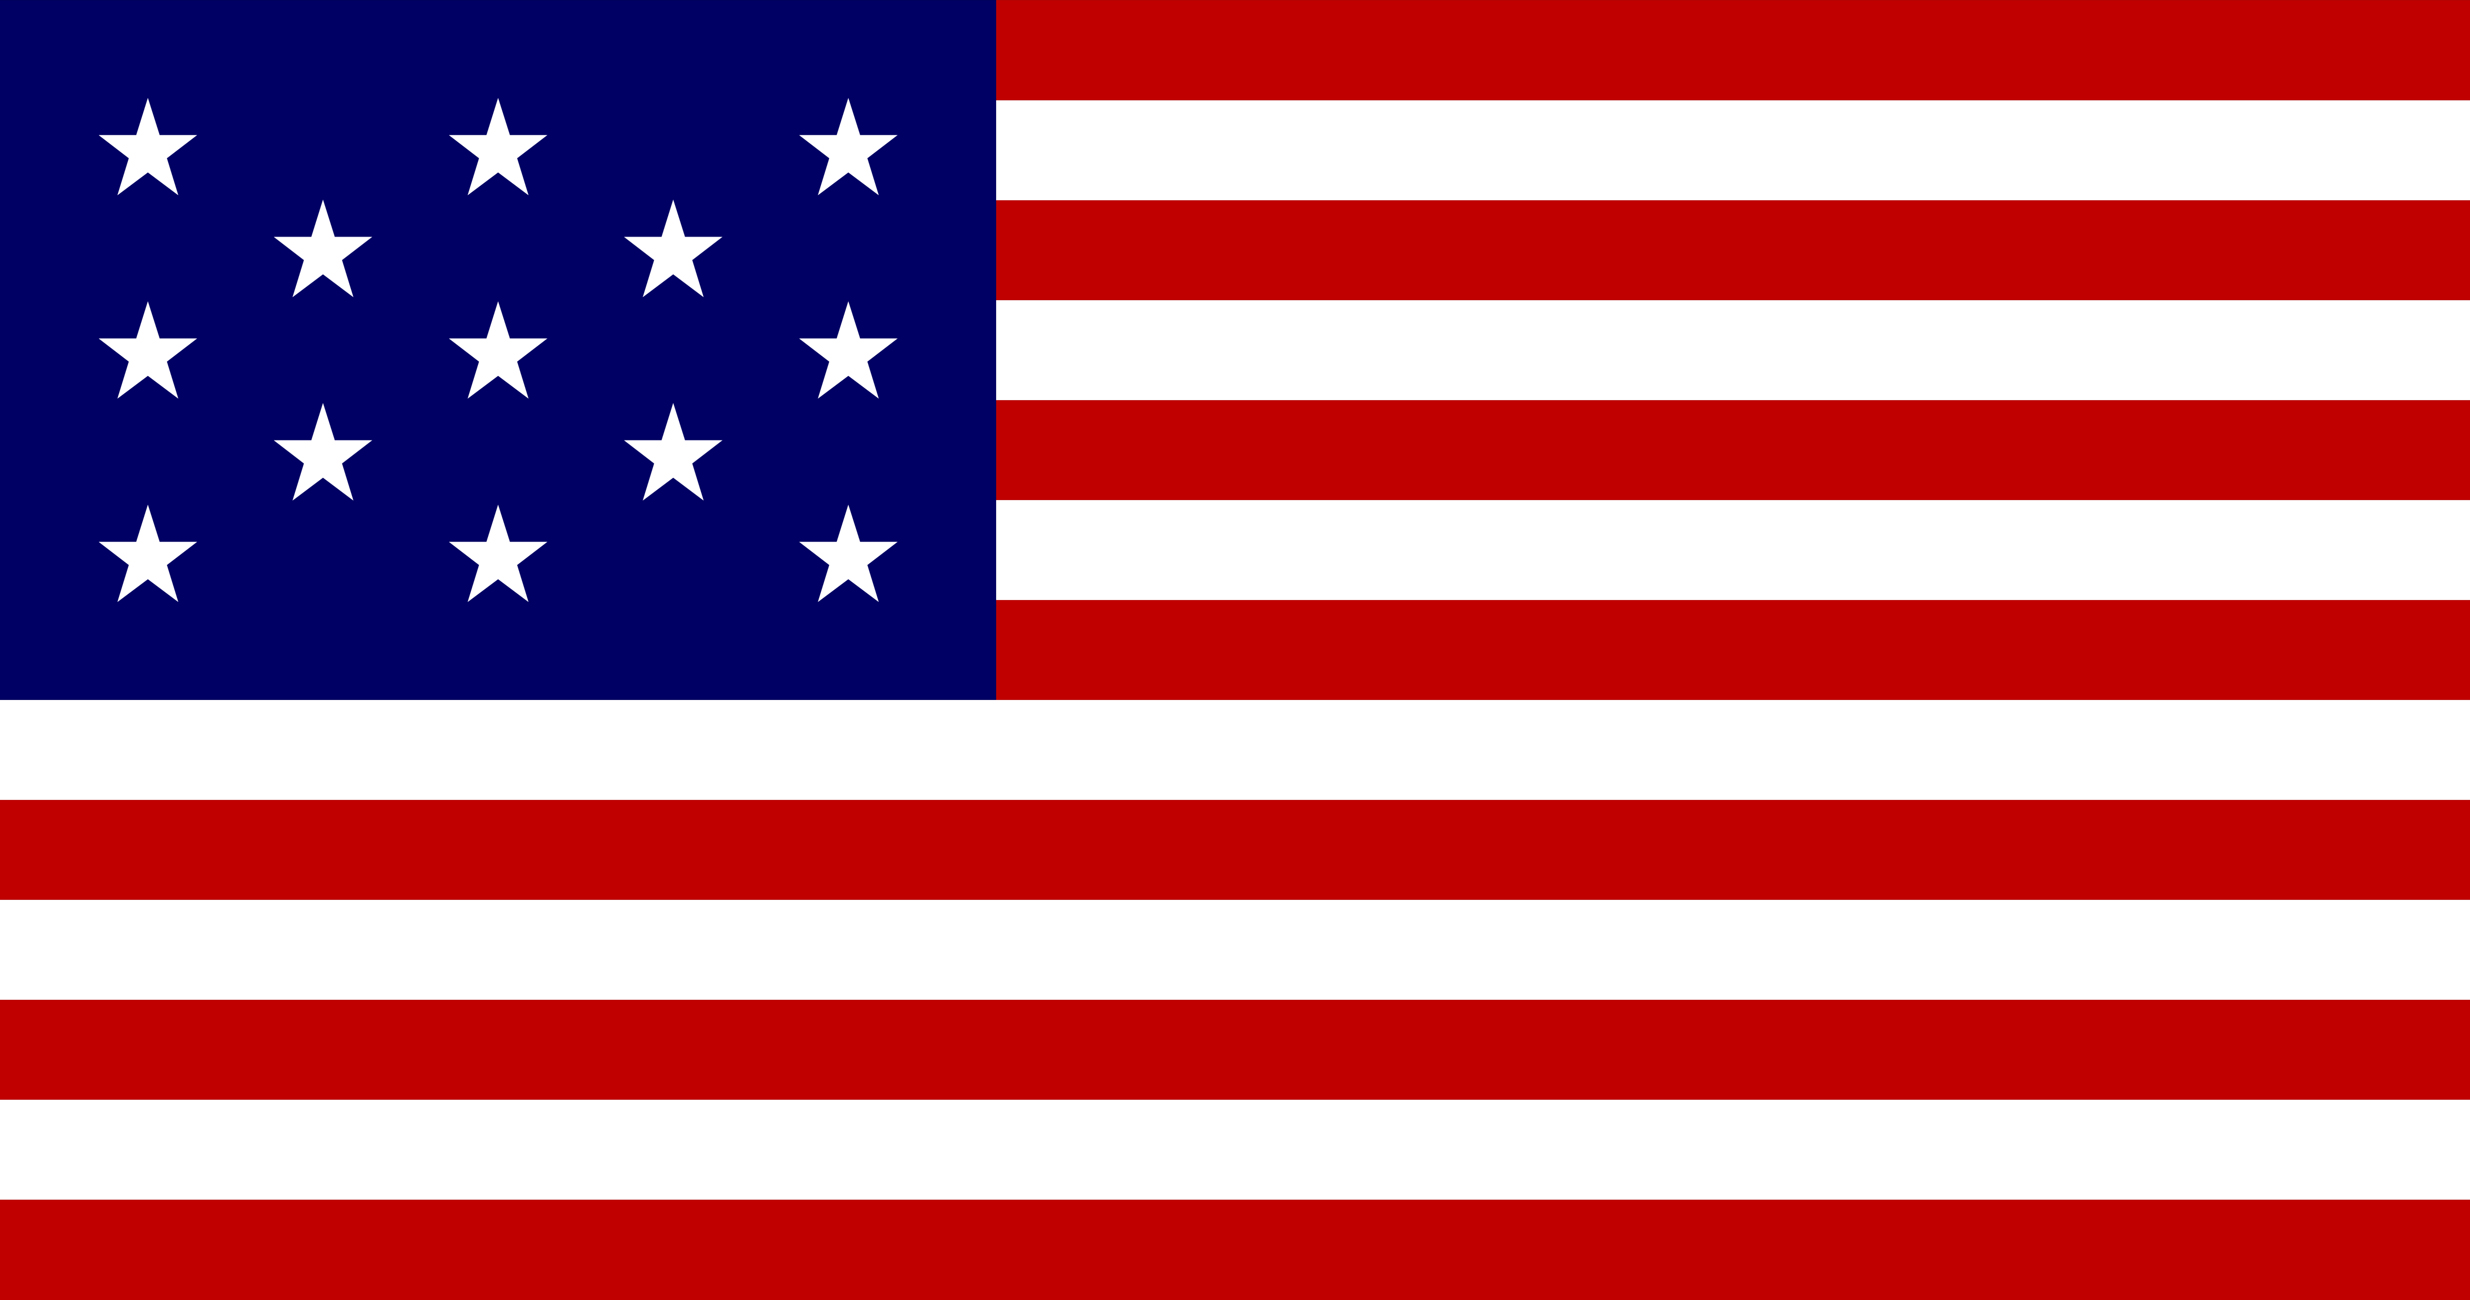 13 Star United States Flag, Flag, Freedom, Independence, Liberty, HQ Photo